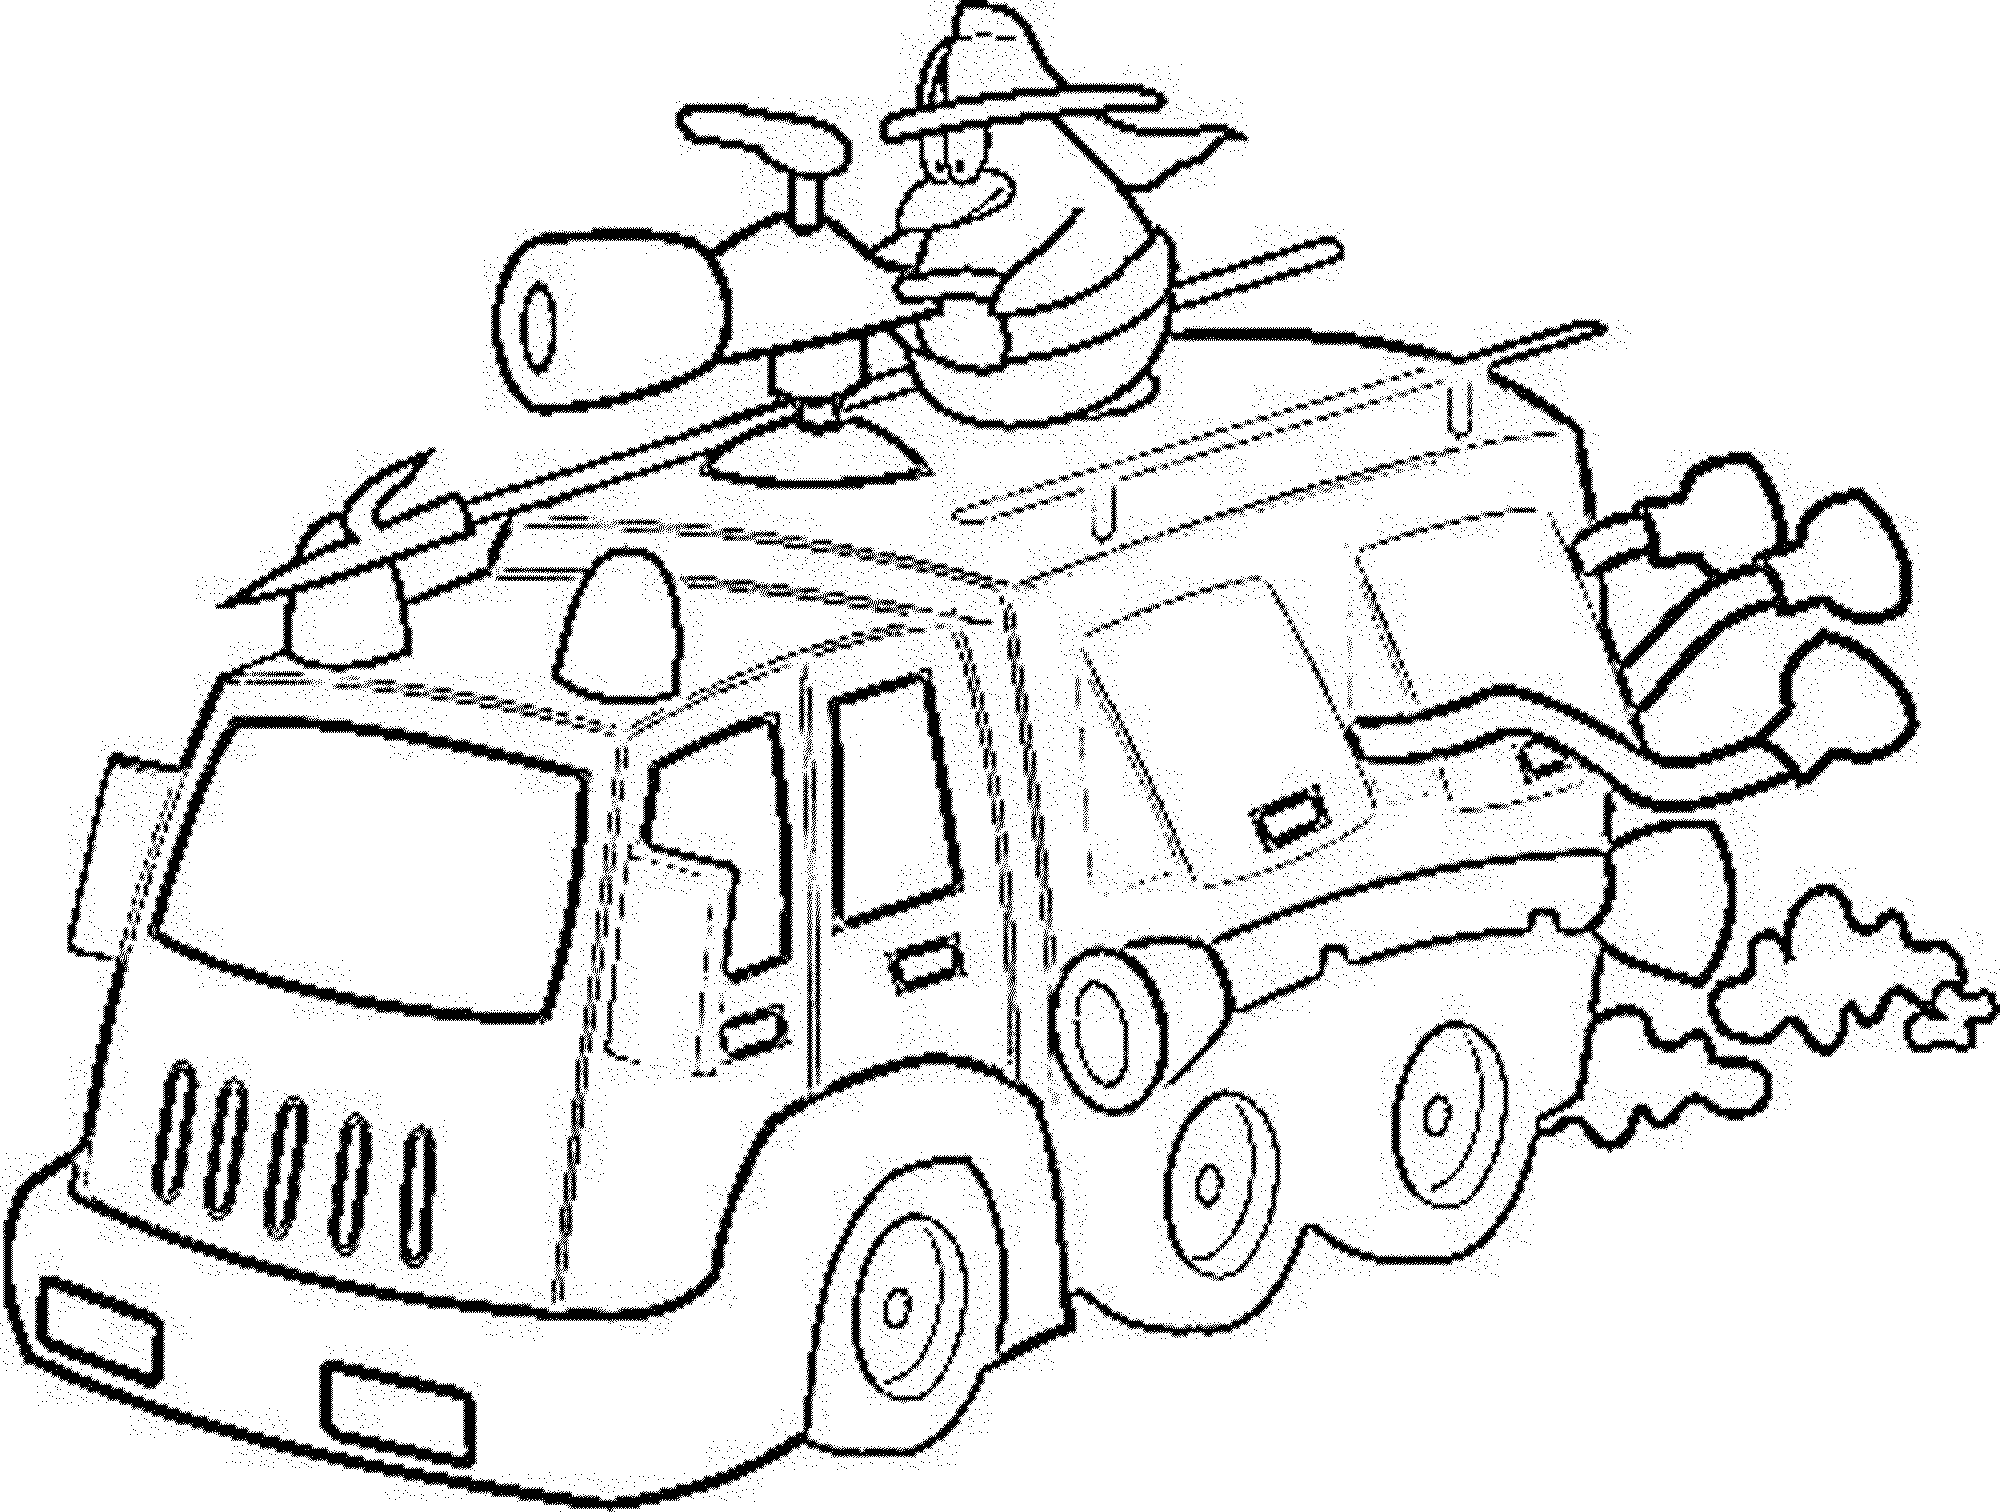 fire-truck-coloring-pages-for-kids | | BestAppsForKids.com